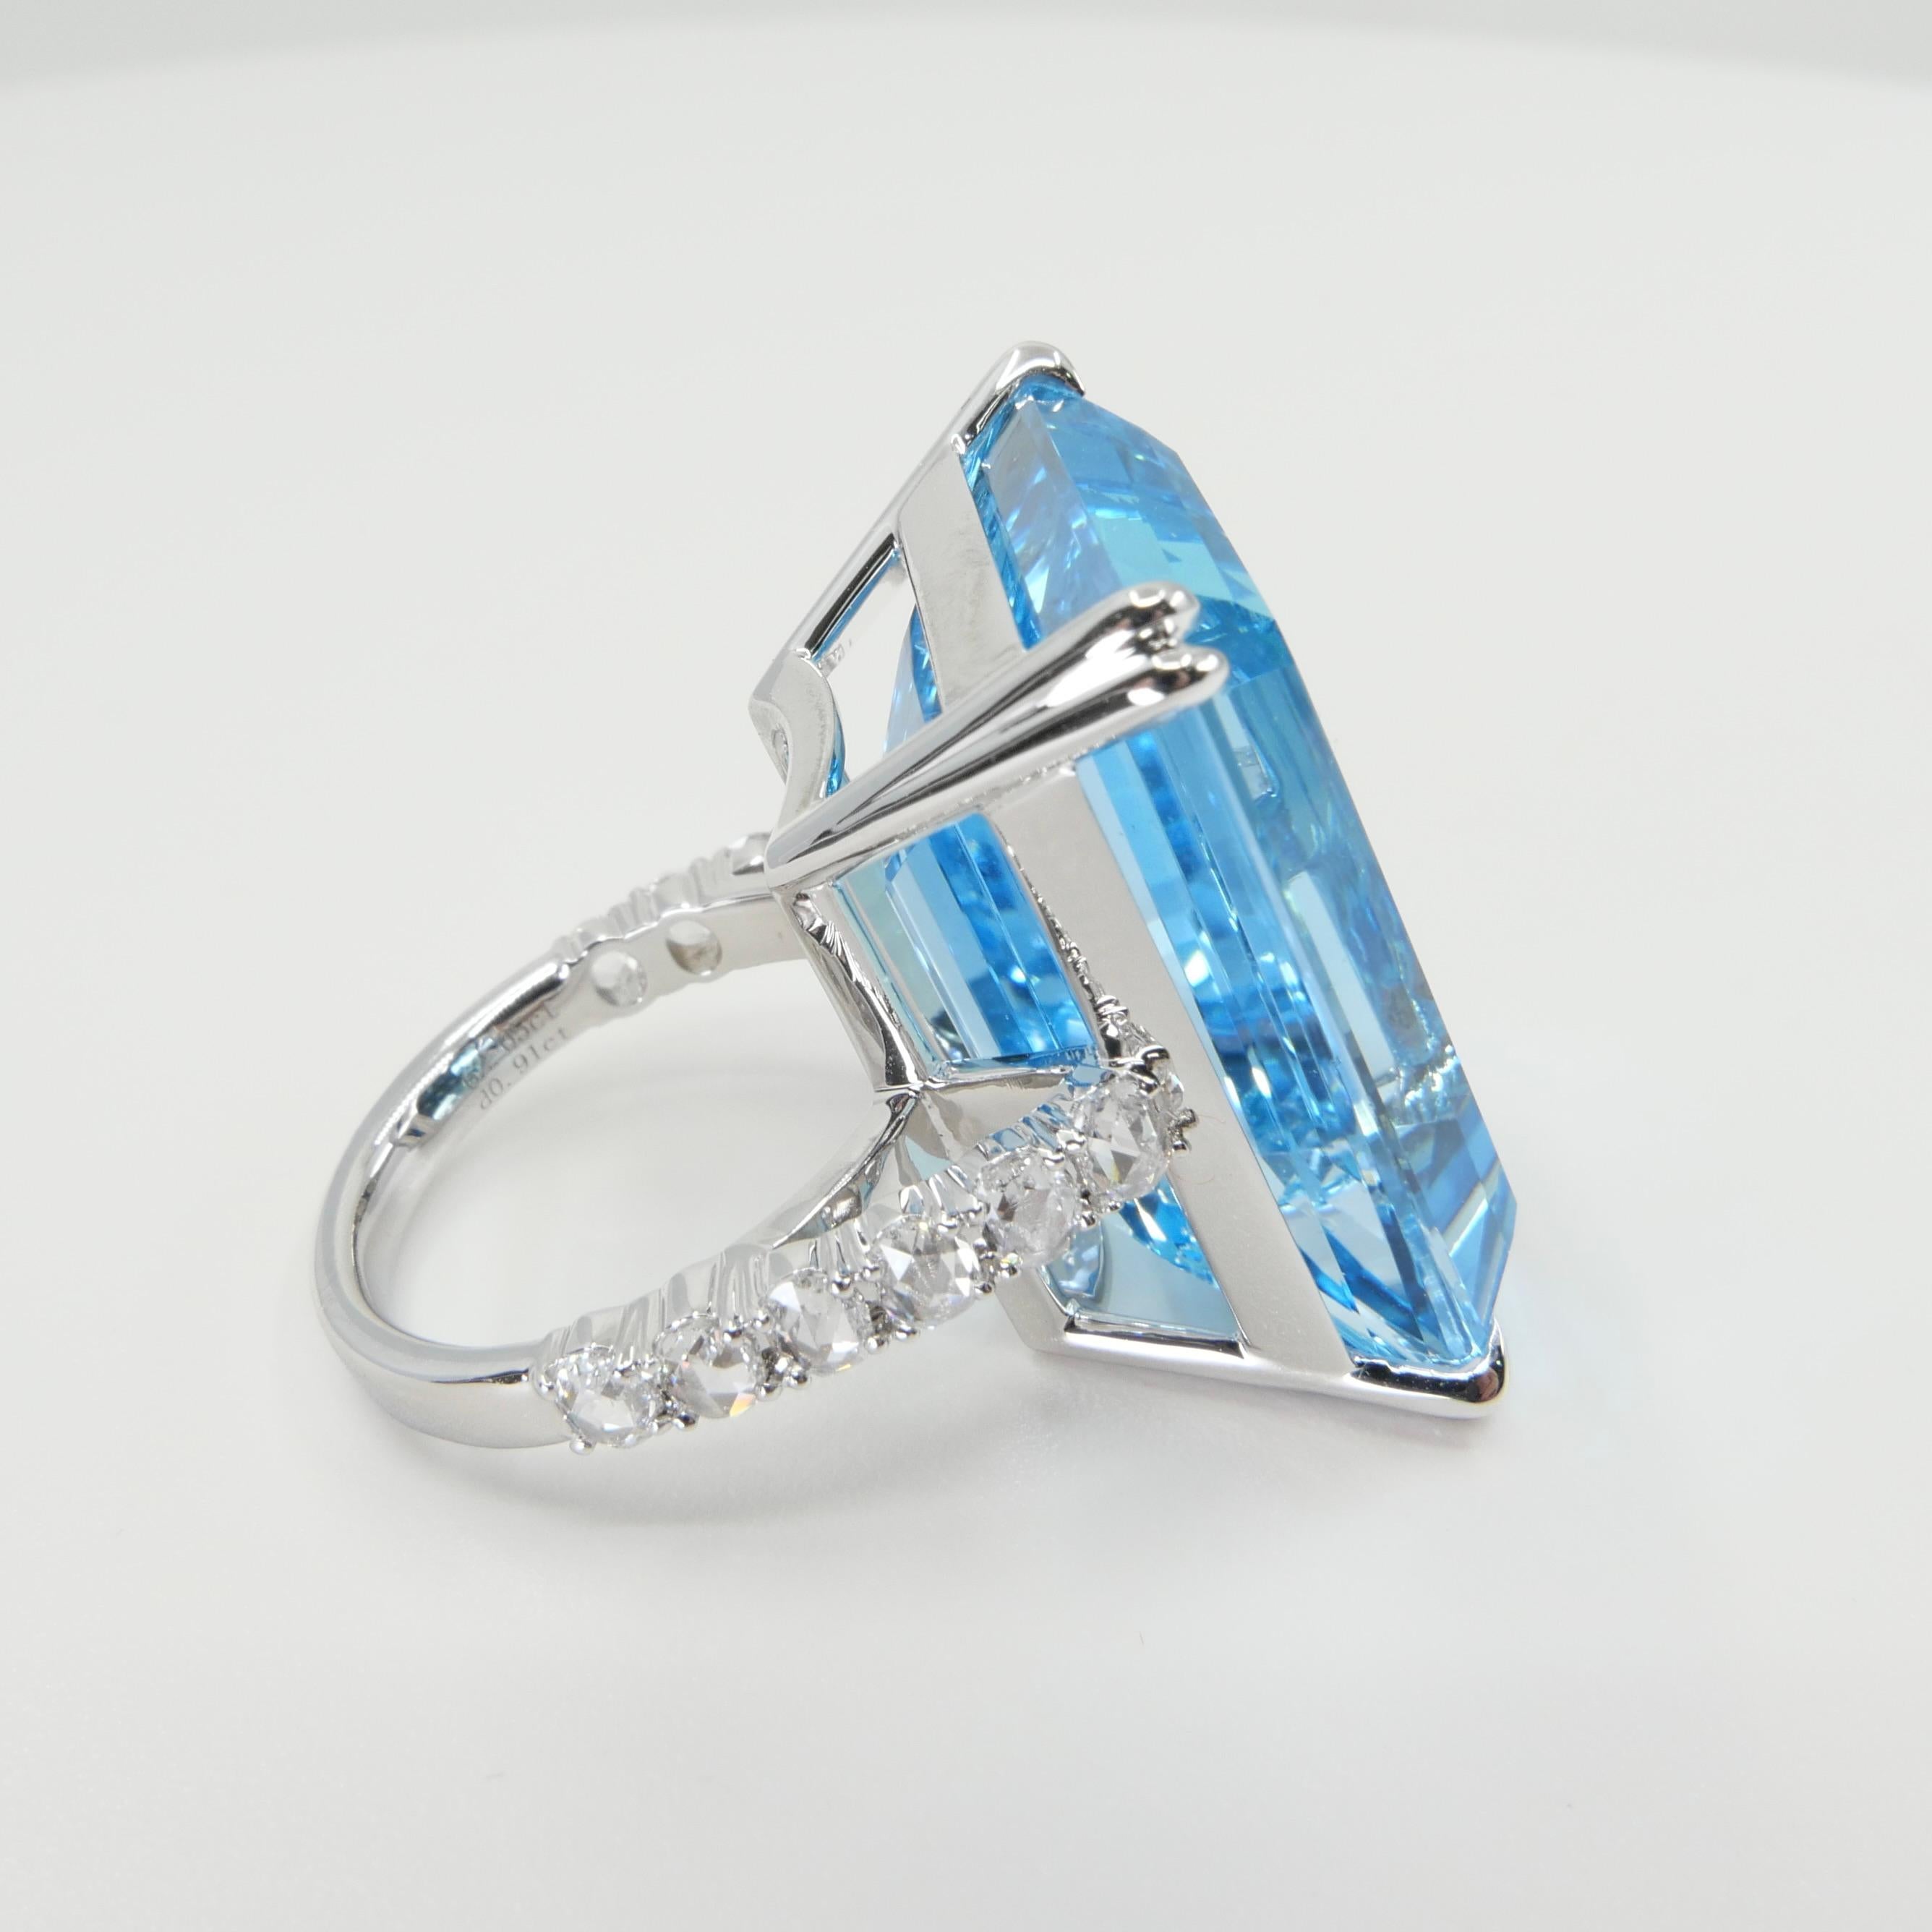 62 Cts Step Cut Blue Topaz & Rose Cut Diamond Cocktail Ring, Substantial For Sale 2